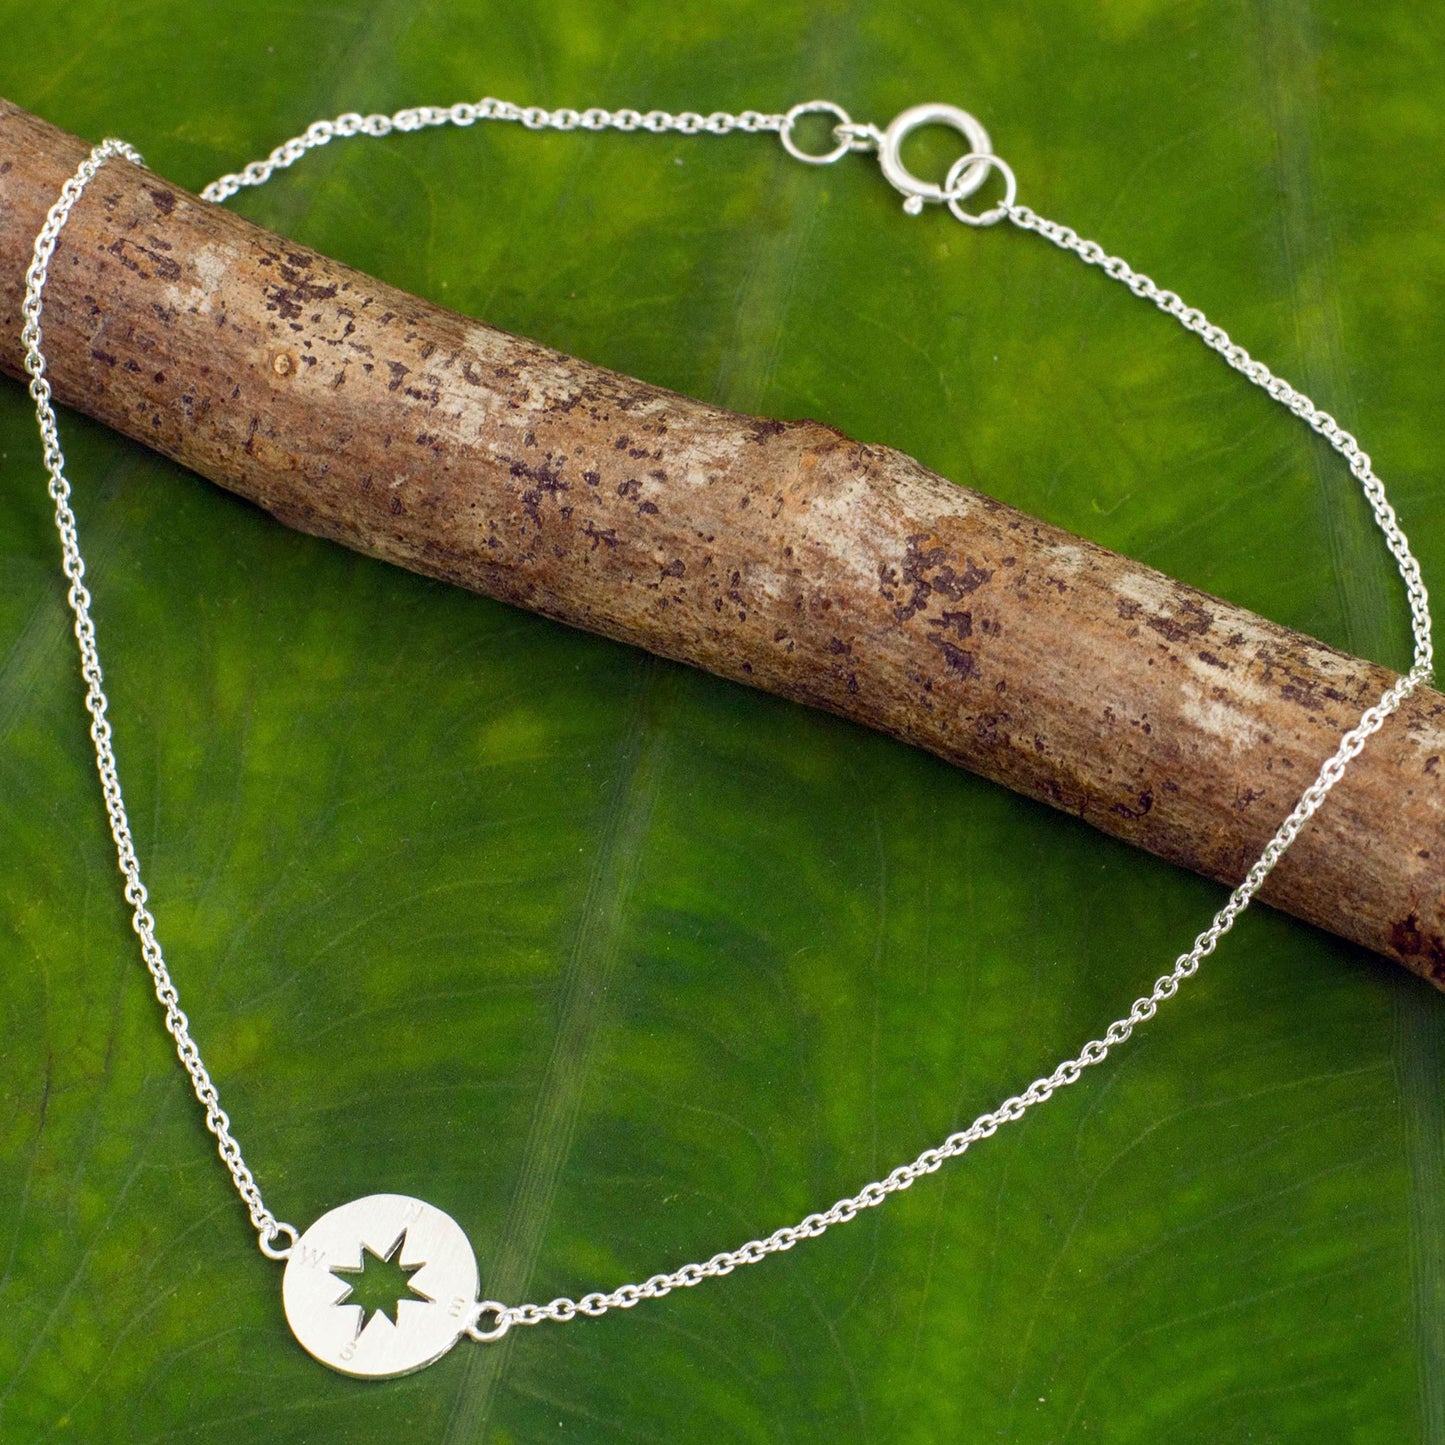 Compass Handcrafted Brushed Sterling Silver Anklet from Thailand